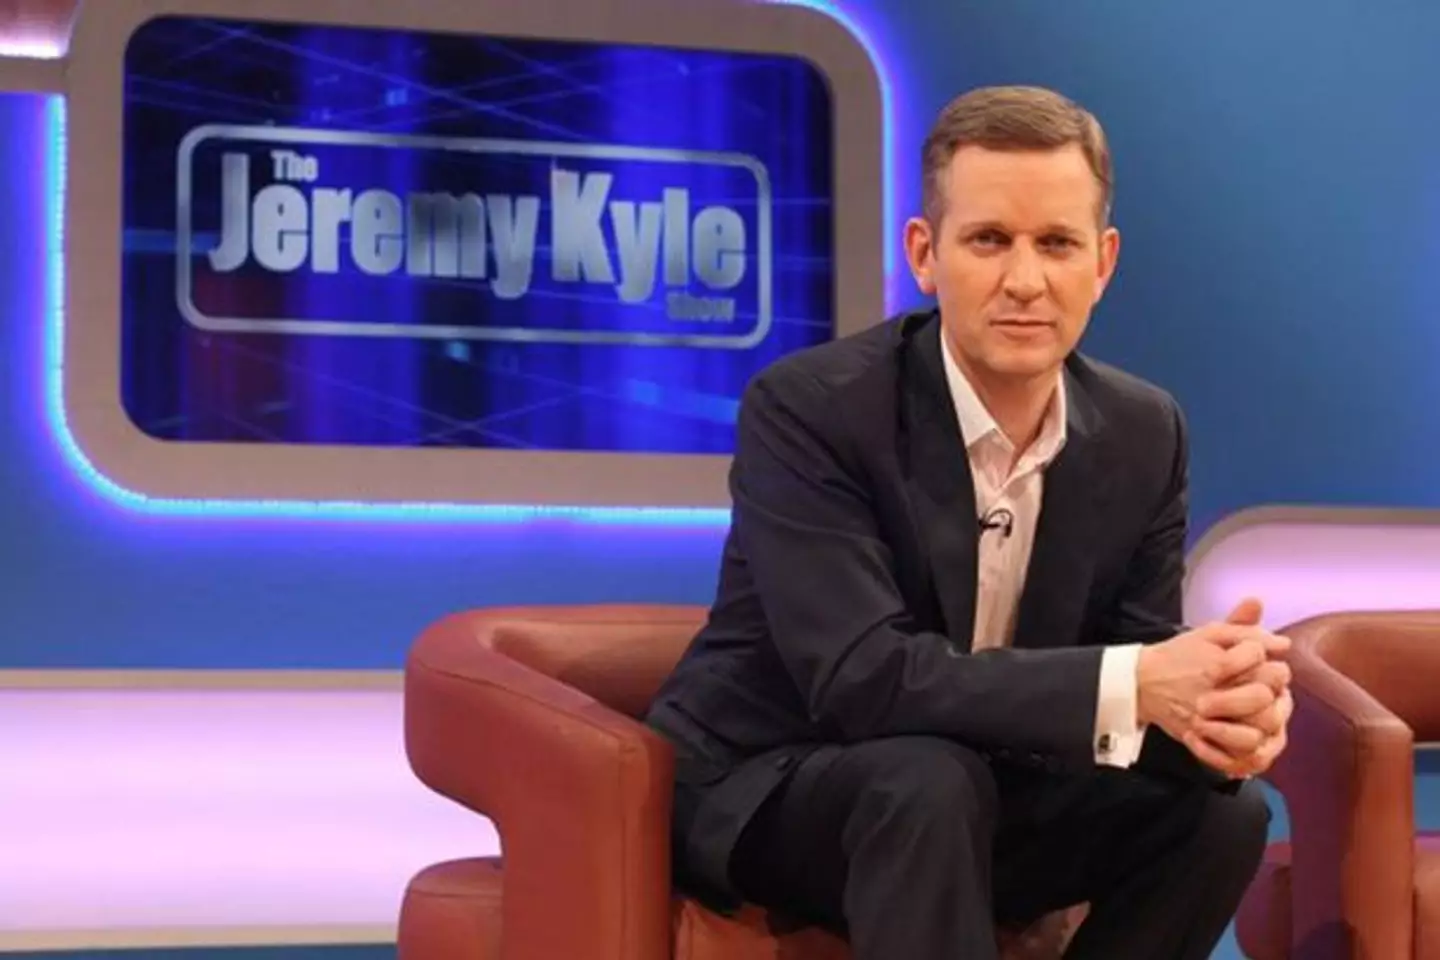 Hulse appeared on a 2011 episode of The Jeremy Kyle Show.